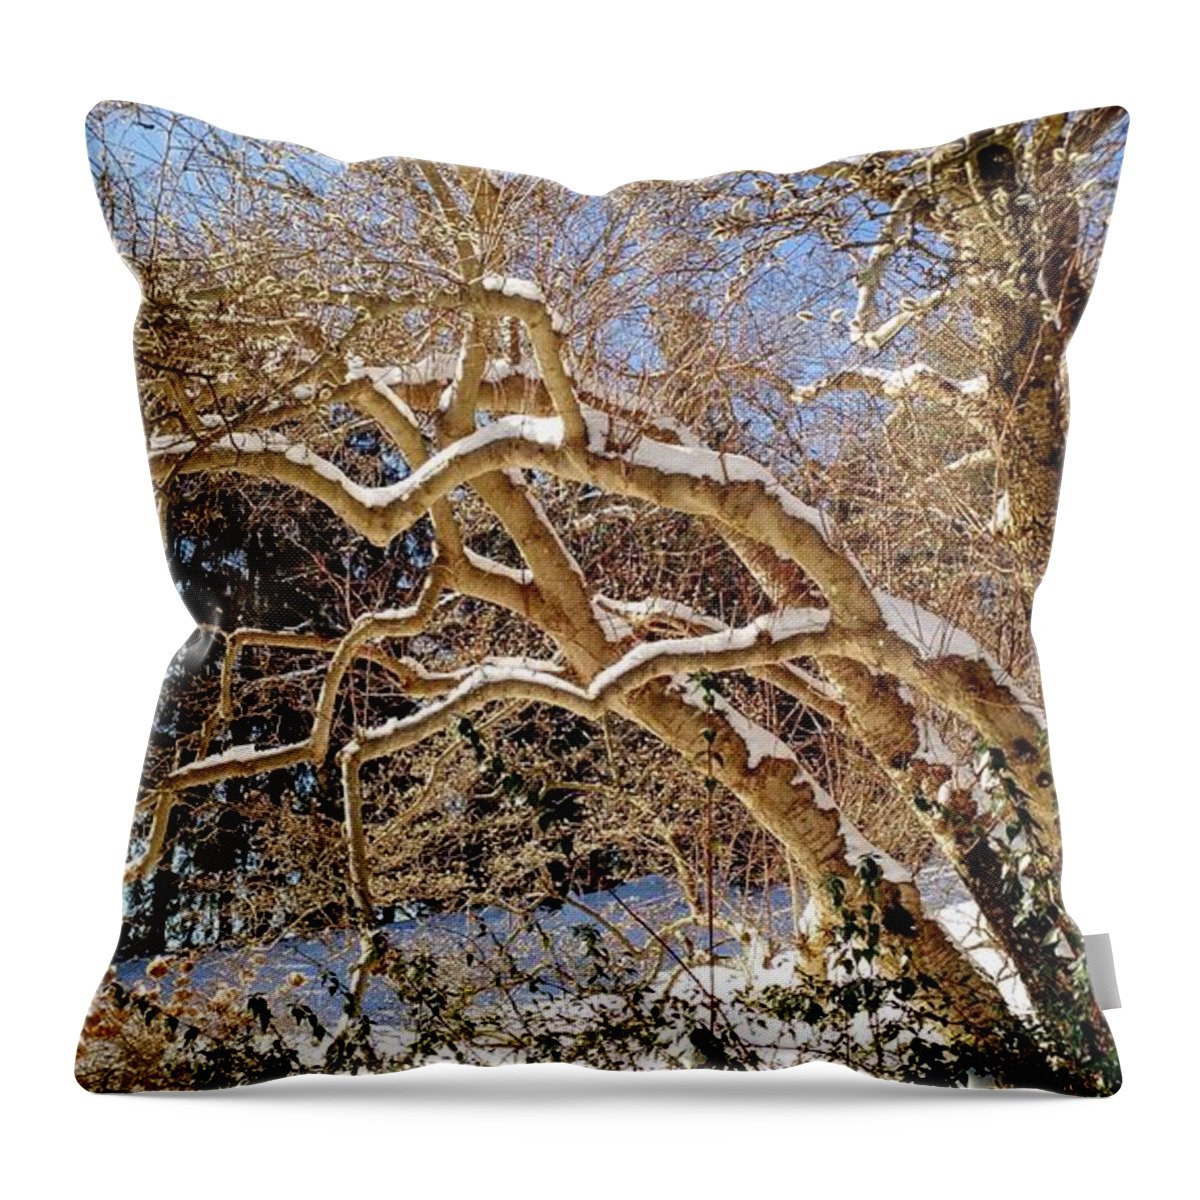 Landscape Throw Pillow featuring the photograph Winter Scene by Anita Adams